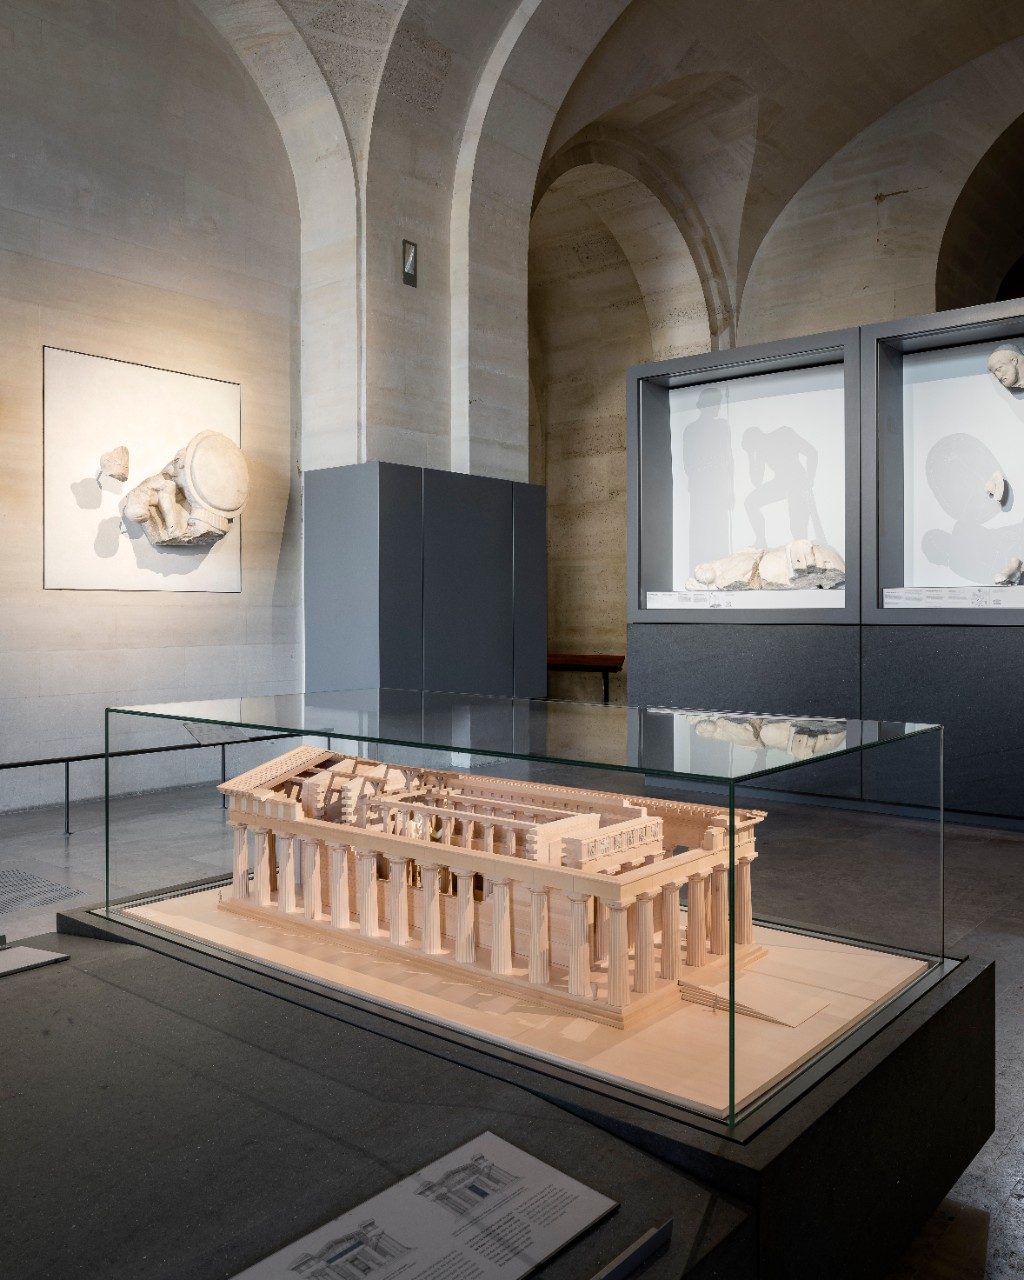 How to Design Museum Interiors: Display Cases to Protect